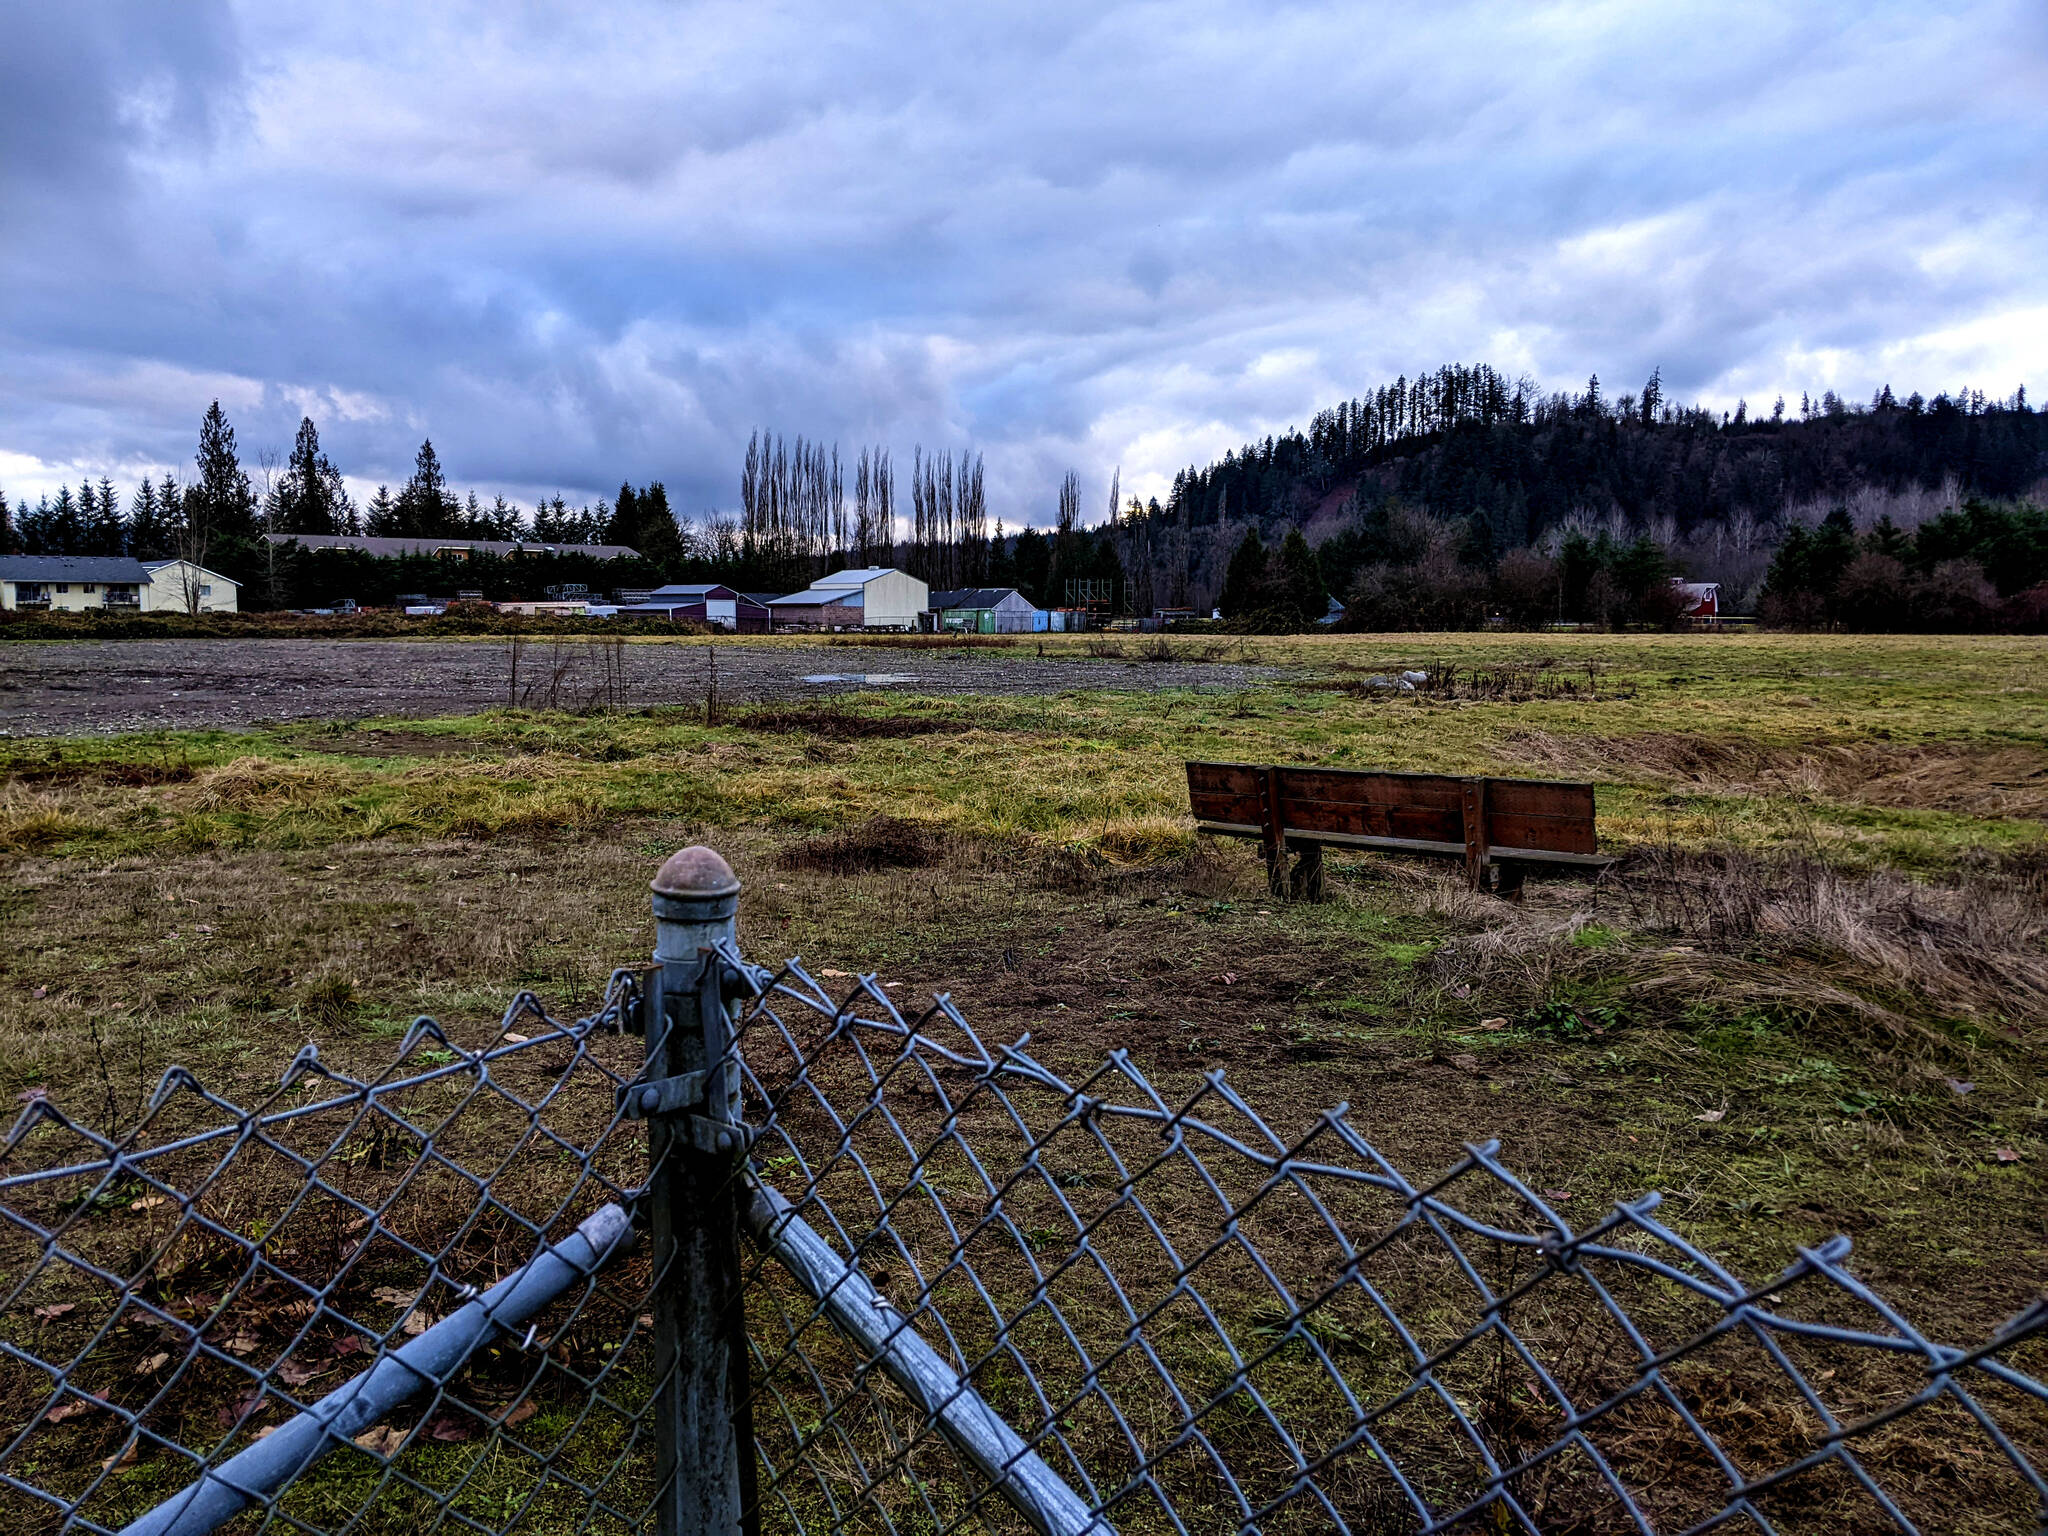 Photo by Conor Wilson/Valley Record.
The Schefer Riverfront Property in western Carnation. The property is site of a potential future business park development.